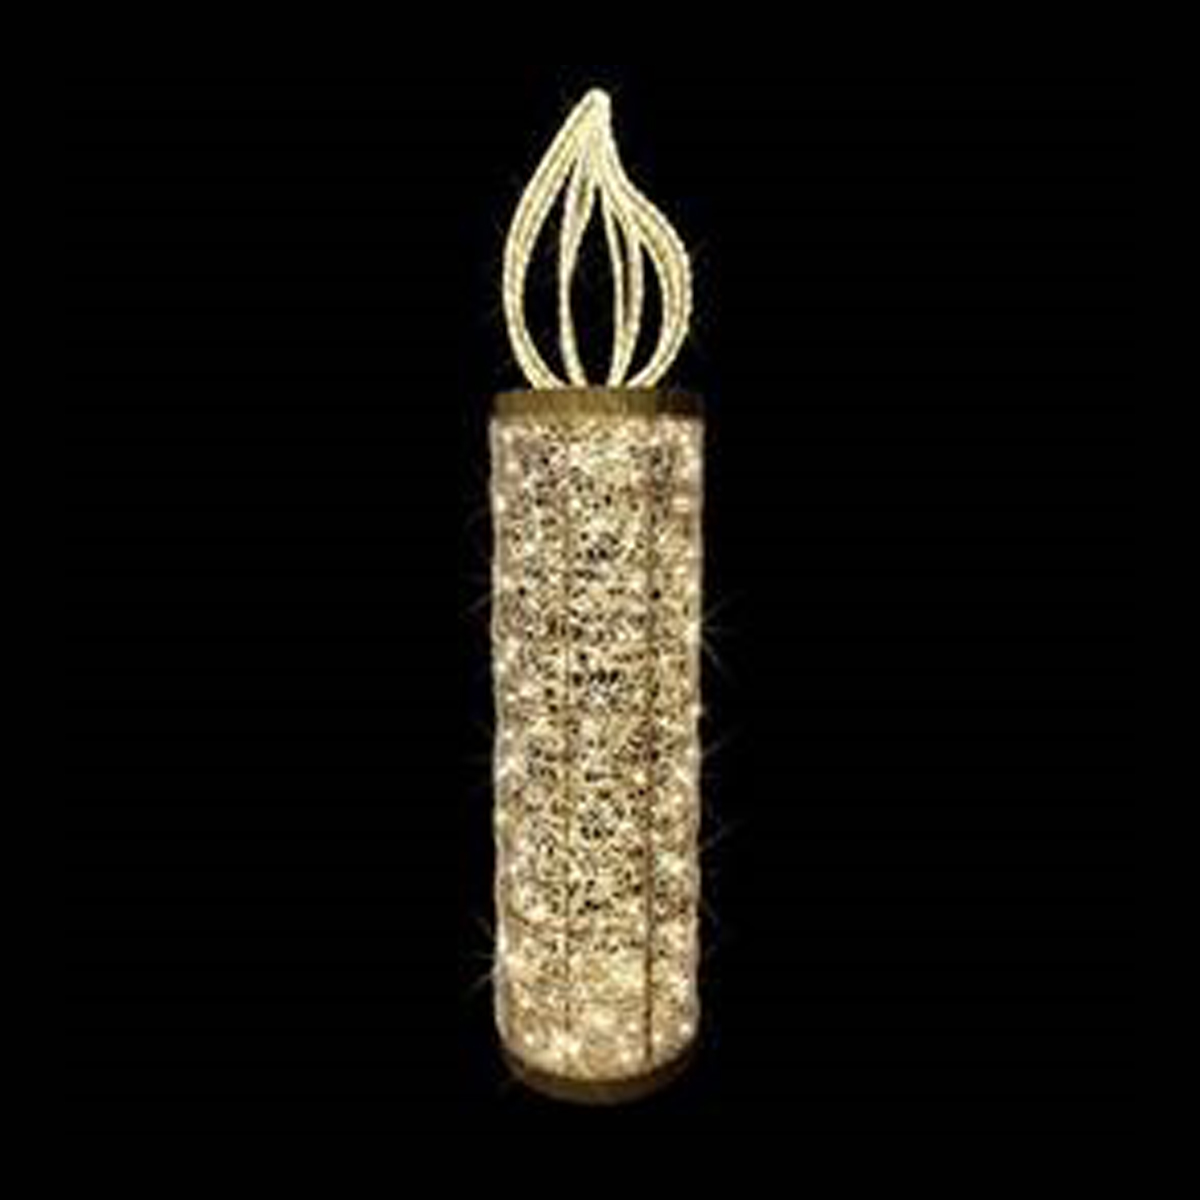 2D Candle - Christmas Display - Warm White LED - Large - 9.8ft tall